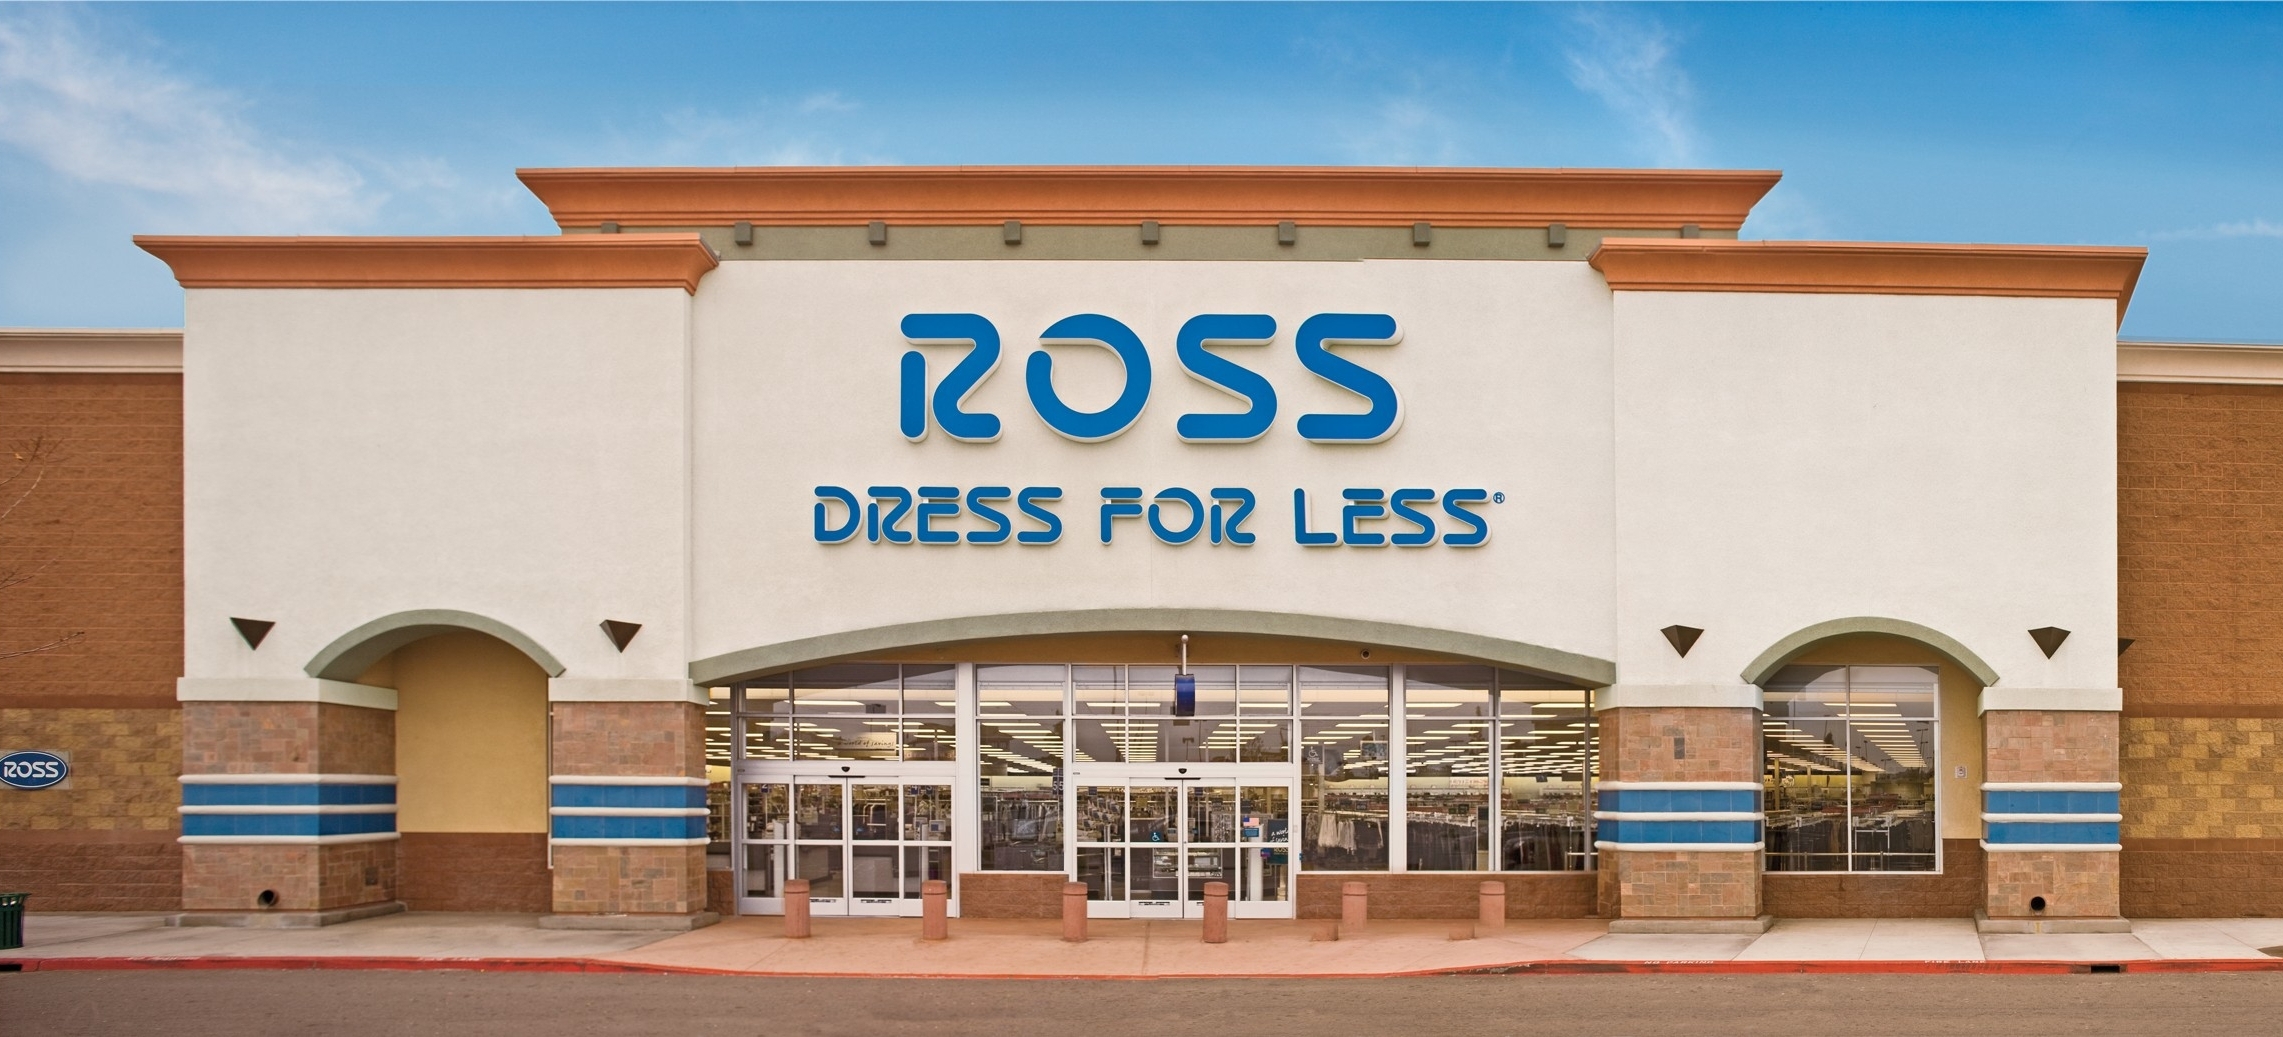 Ross Dress for Less coming to Plainfield | The Times ...